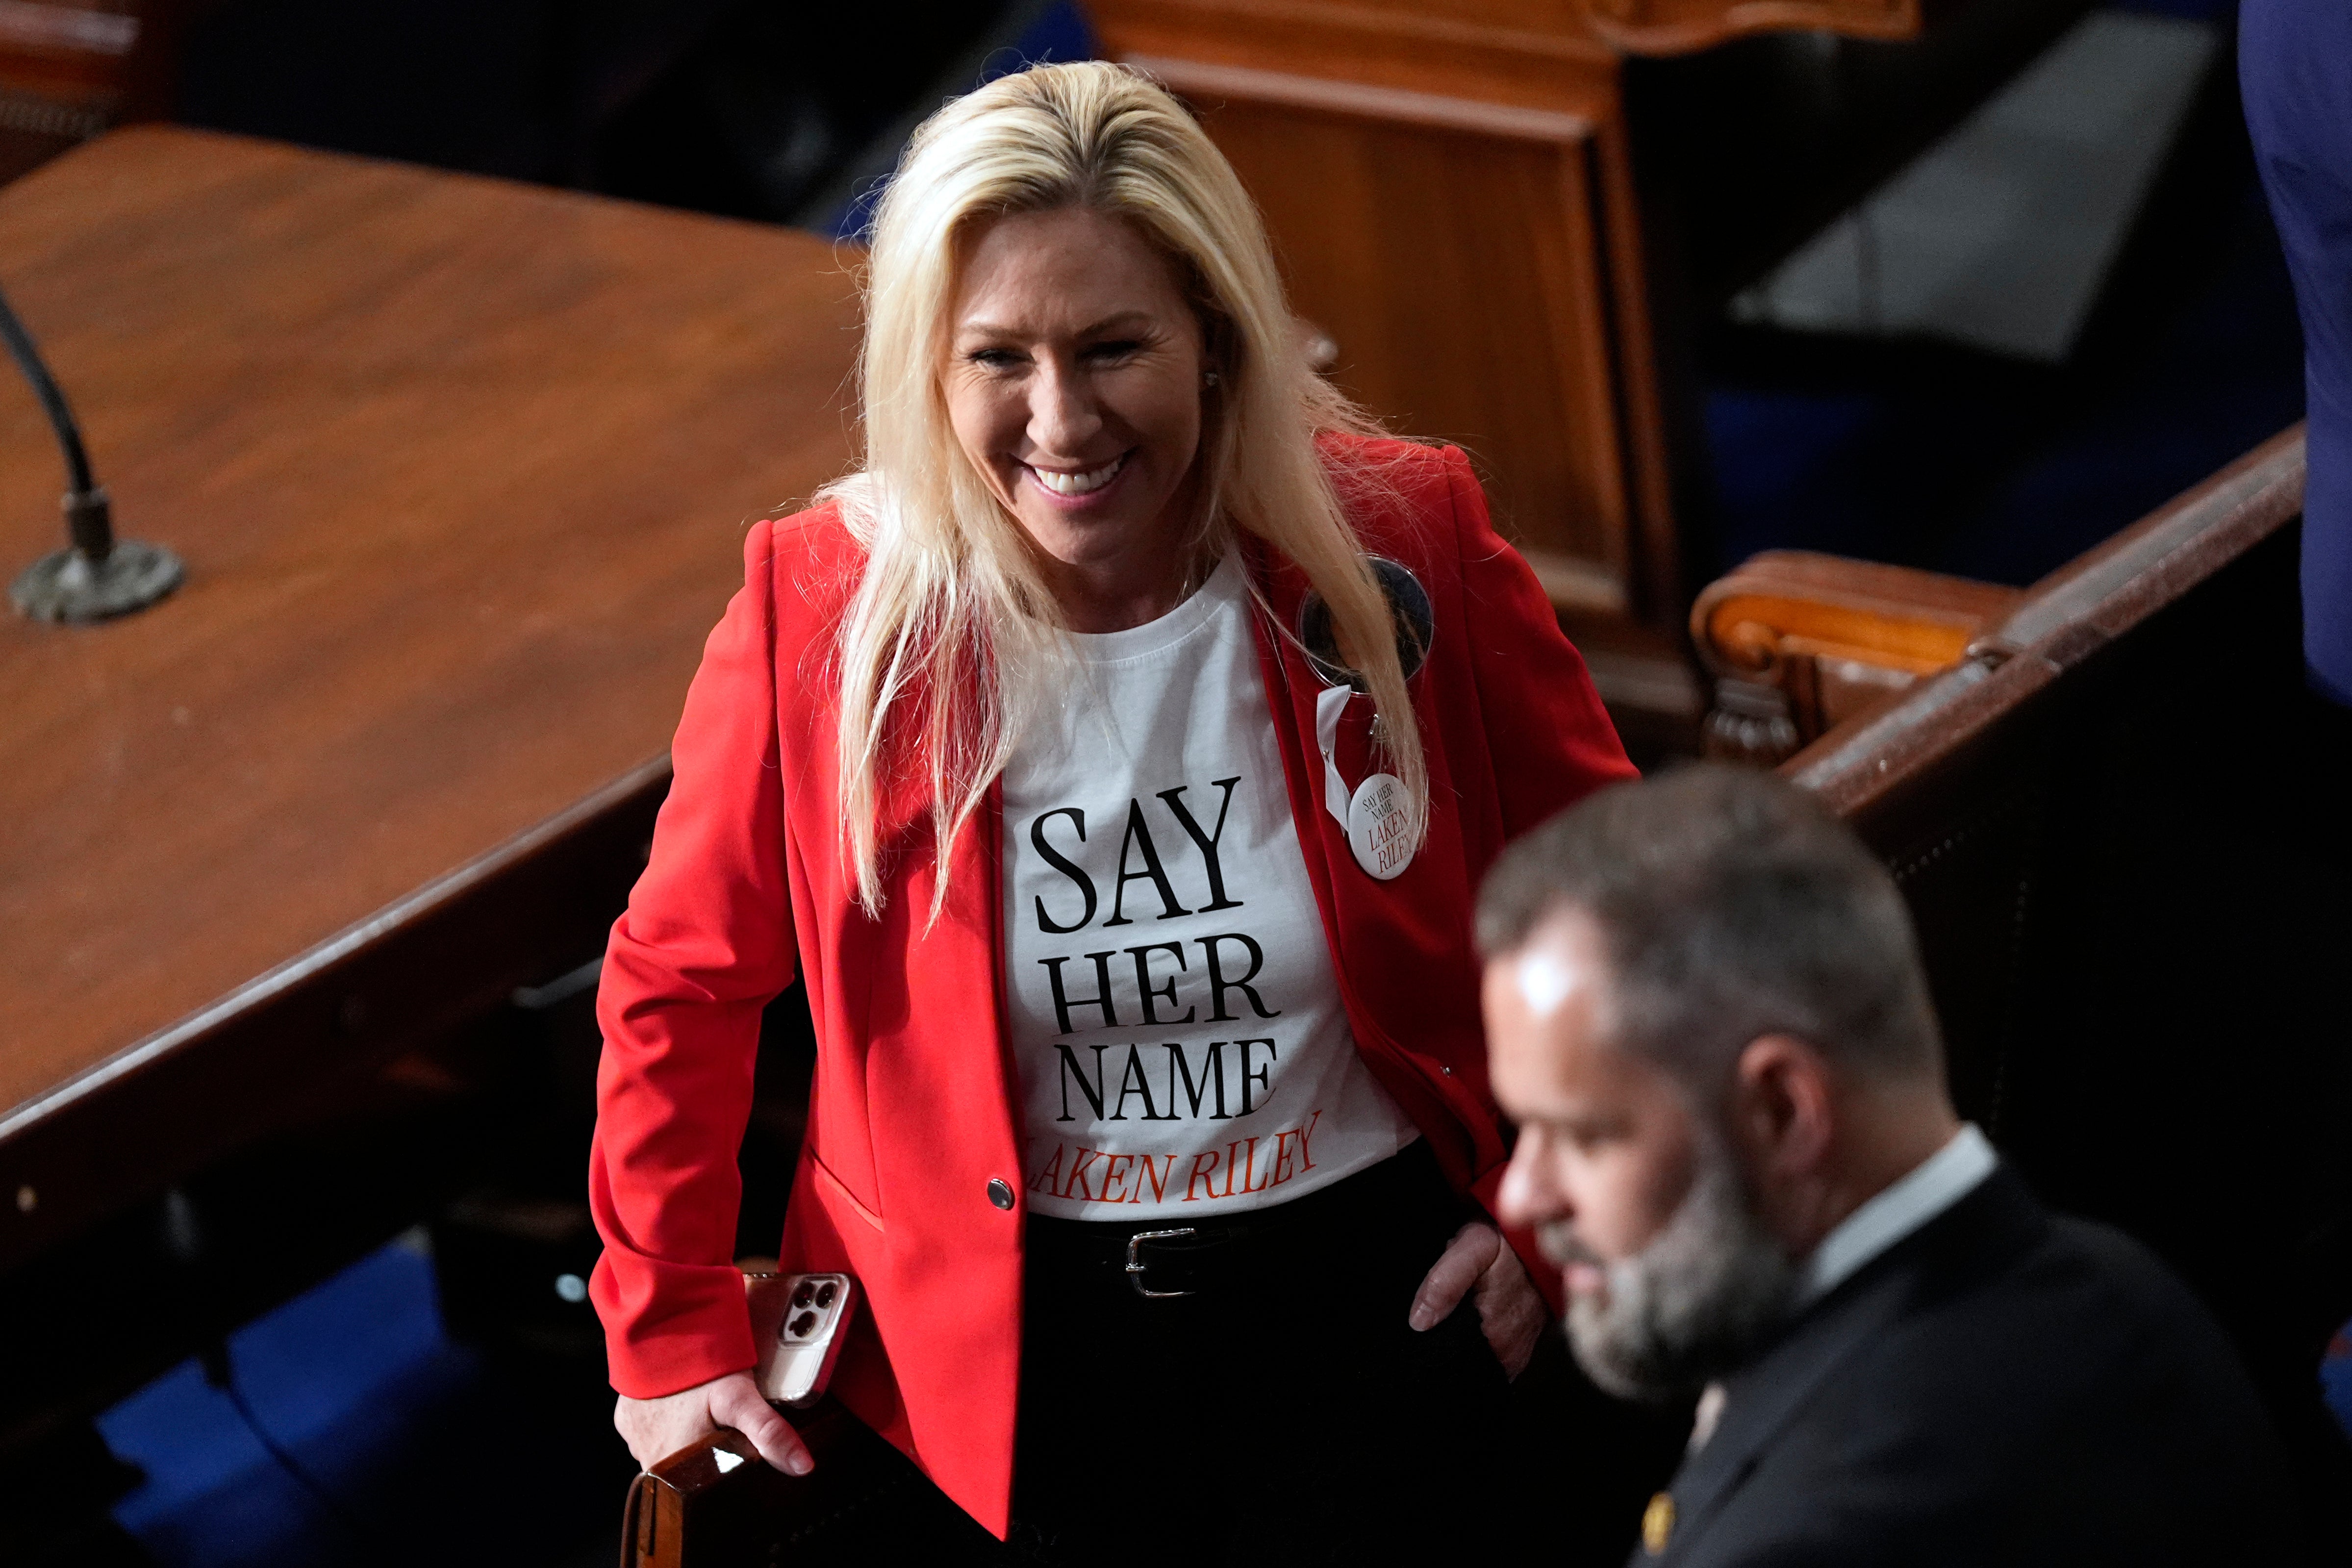 Congresswoman Marjorie Taylor Greene, in a shirt referencing the murder of Laken Riley, during the State of the Union Address